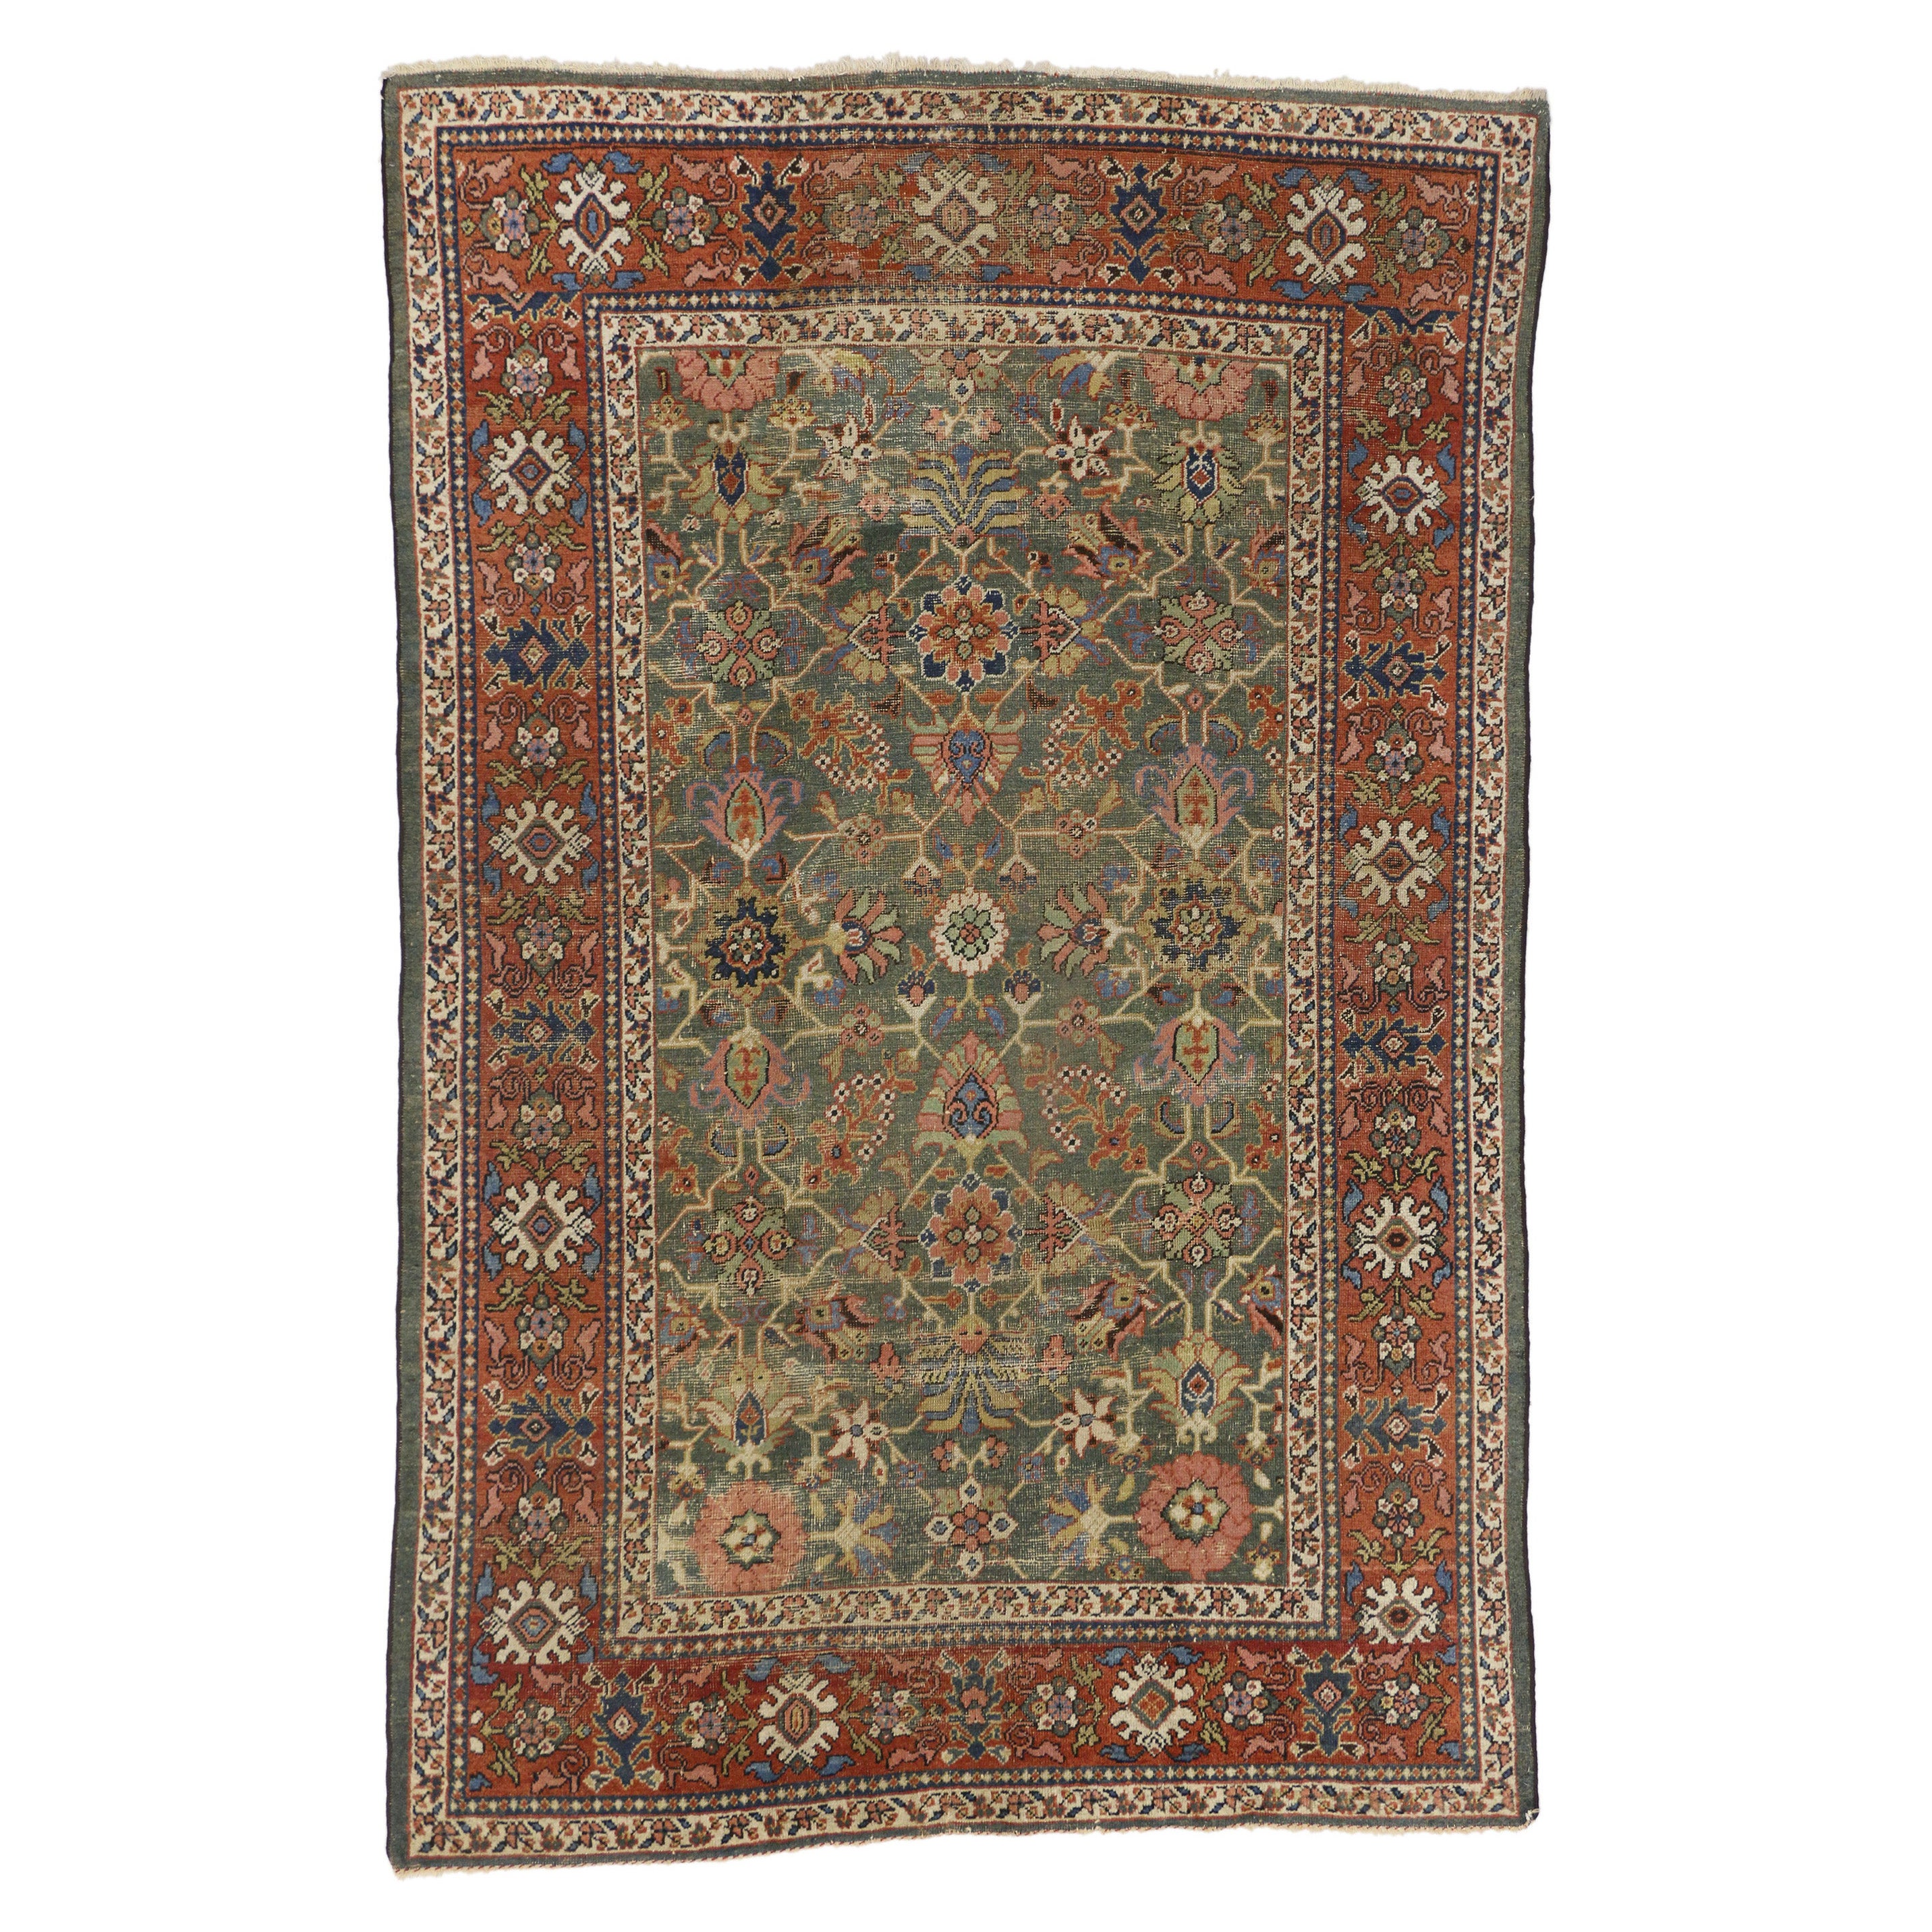 Tapis persan Sultanabad ancien vieilli de style Arts and Crafts rustique